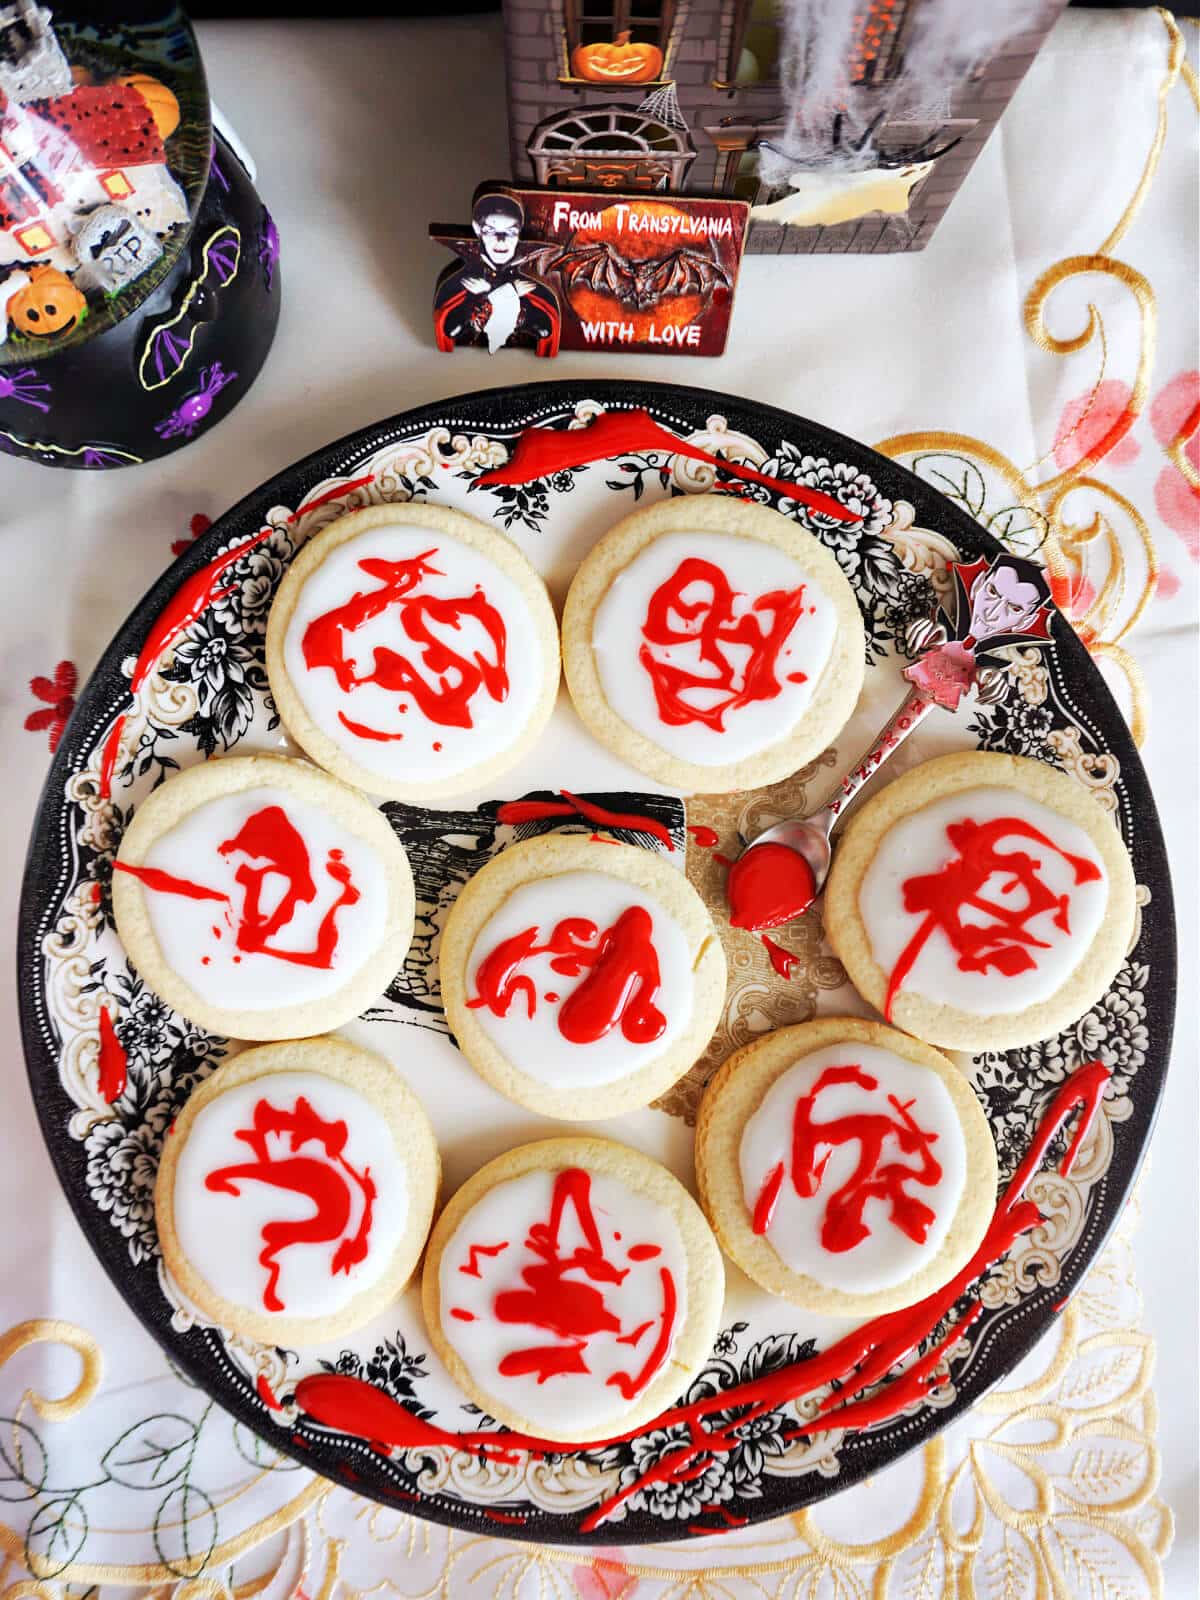 Overhead shoot of a plate with 8 blood splatter cookies.